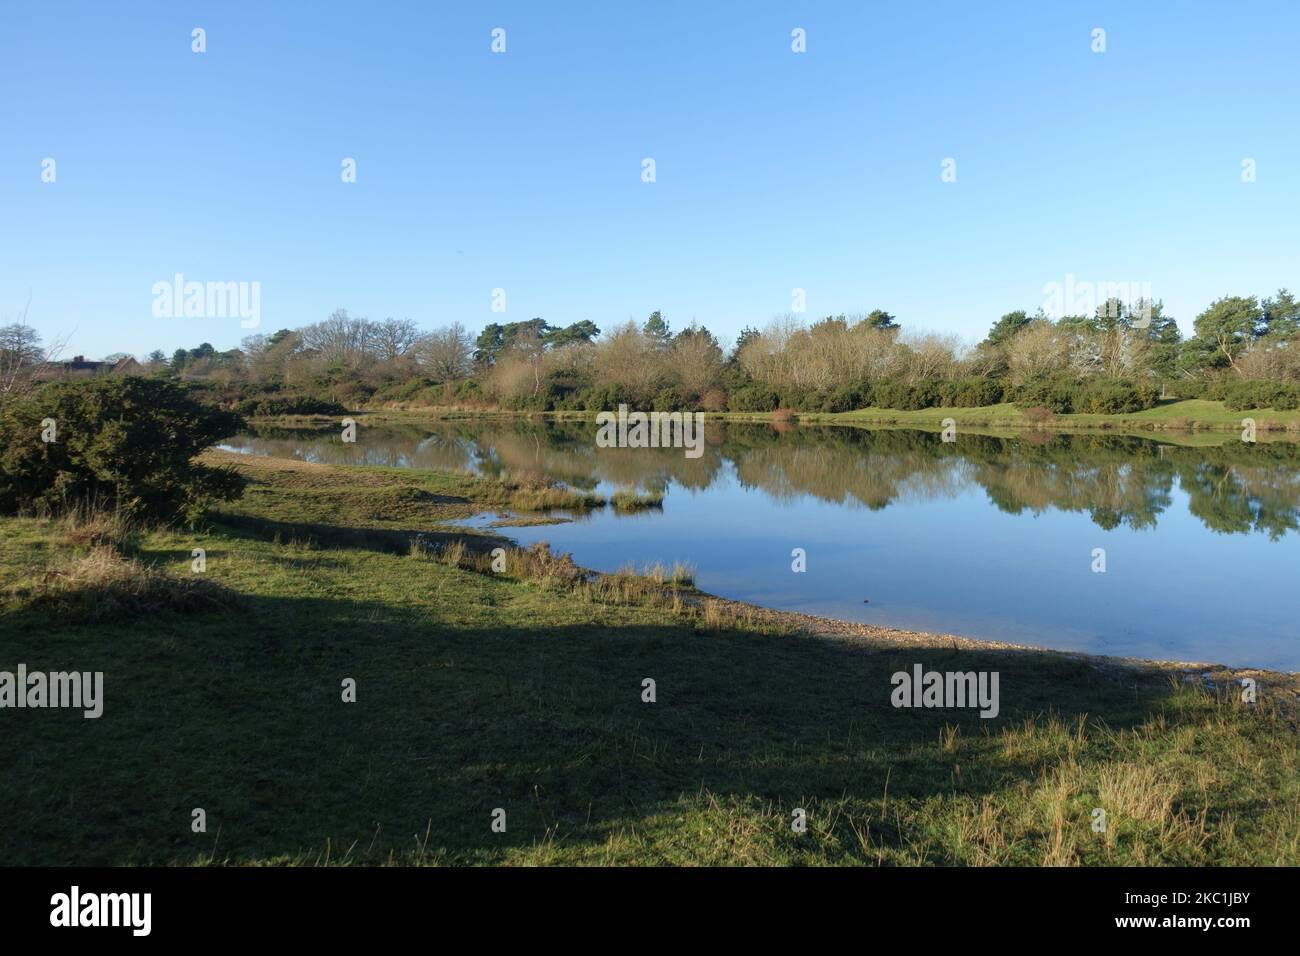 A bright winter day with mirror smooth water suirface on the lakes formed in the nature reserve on the disused airfield at Greenham Common Airbase nea Stock Photo